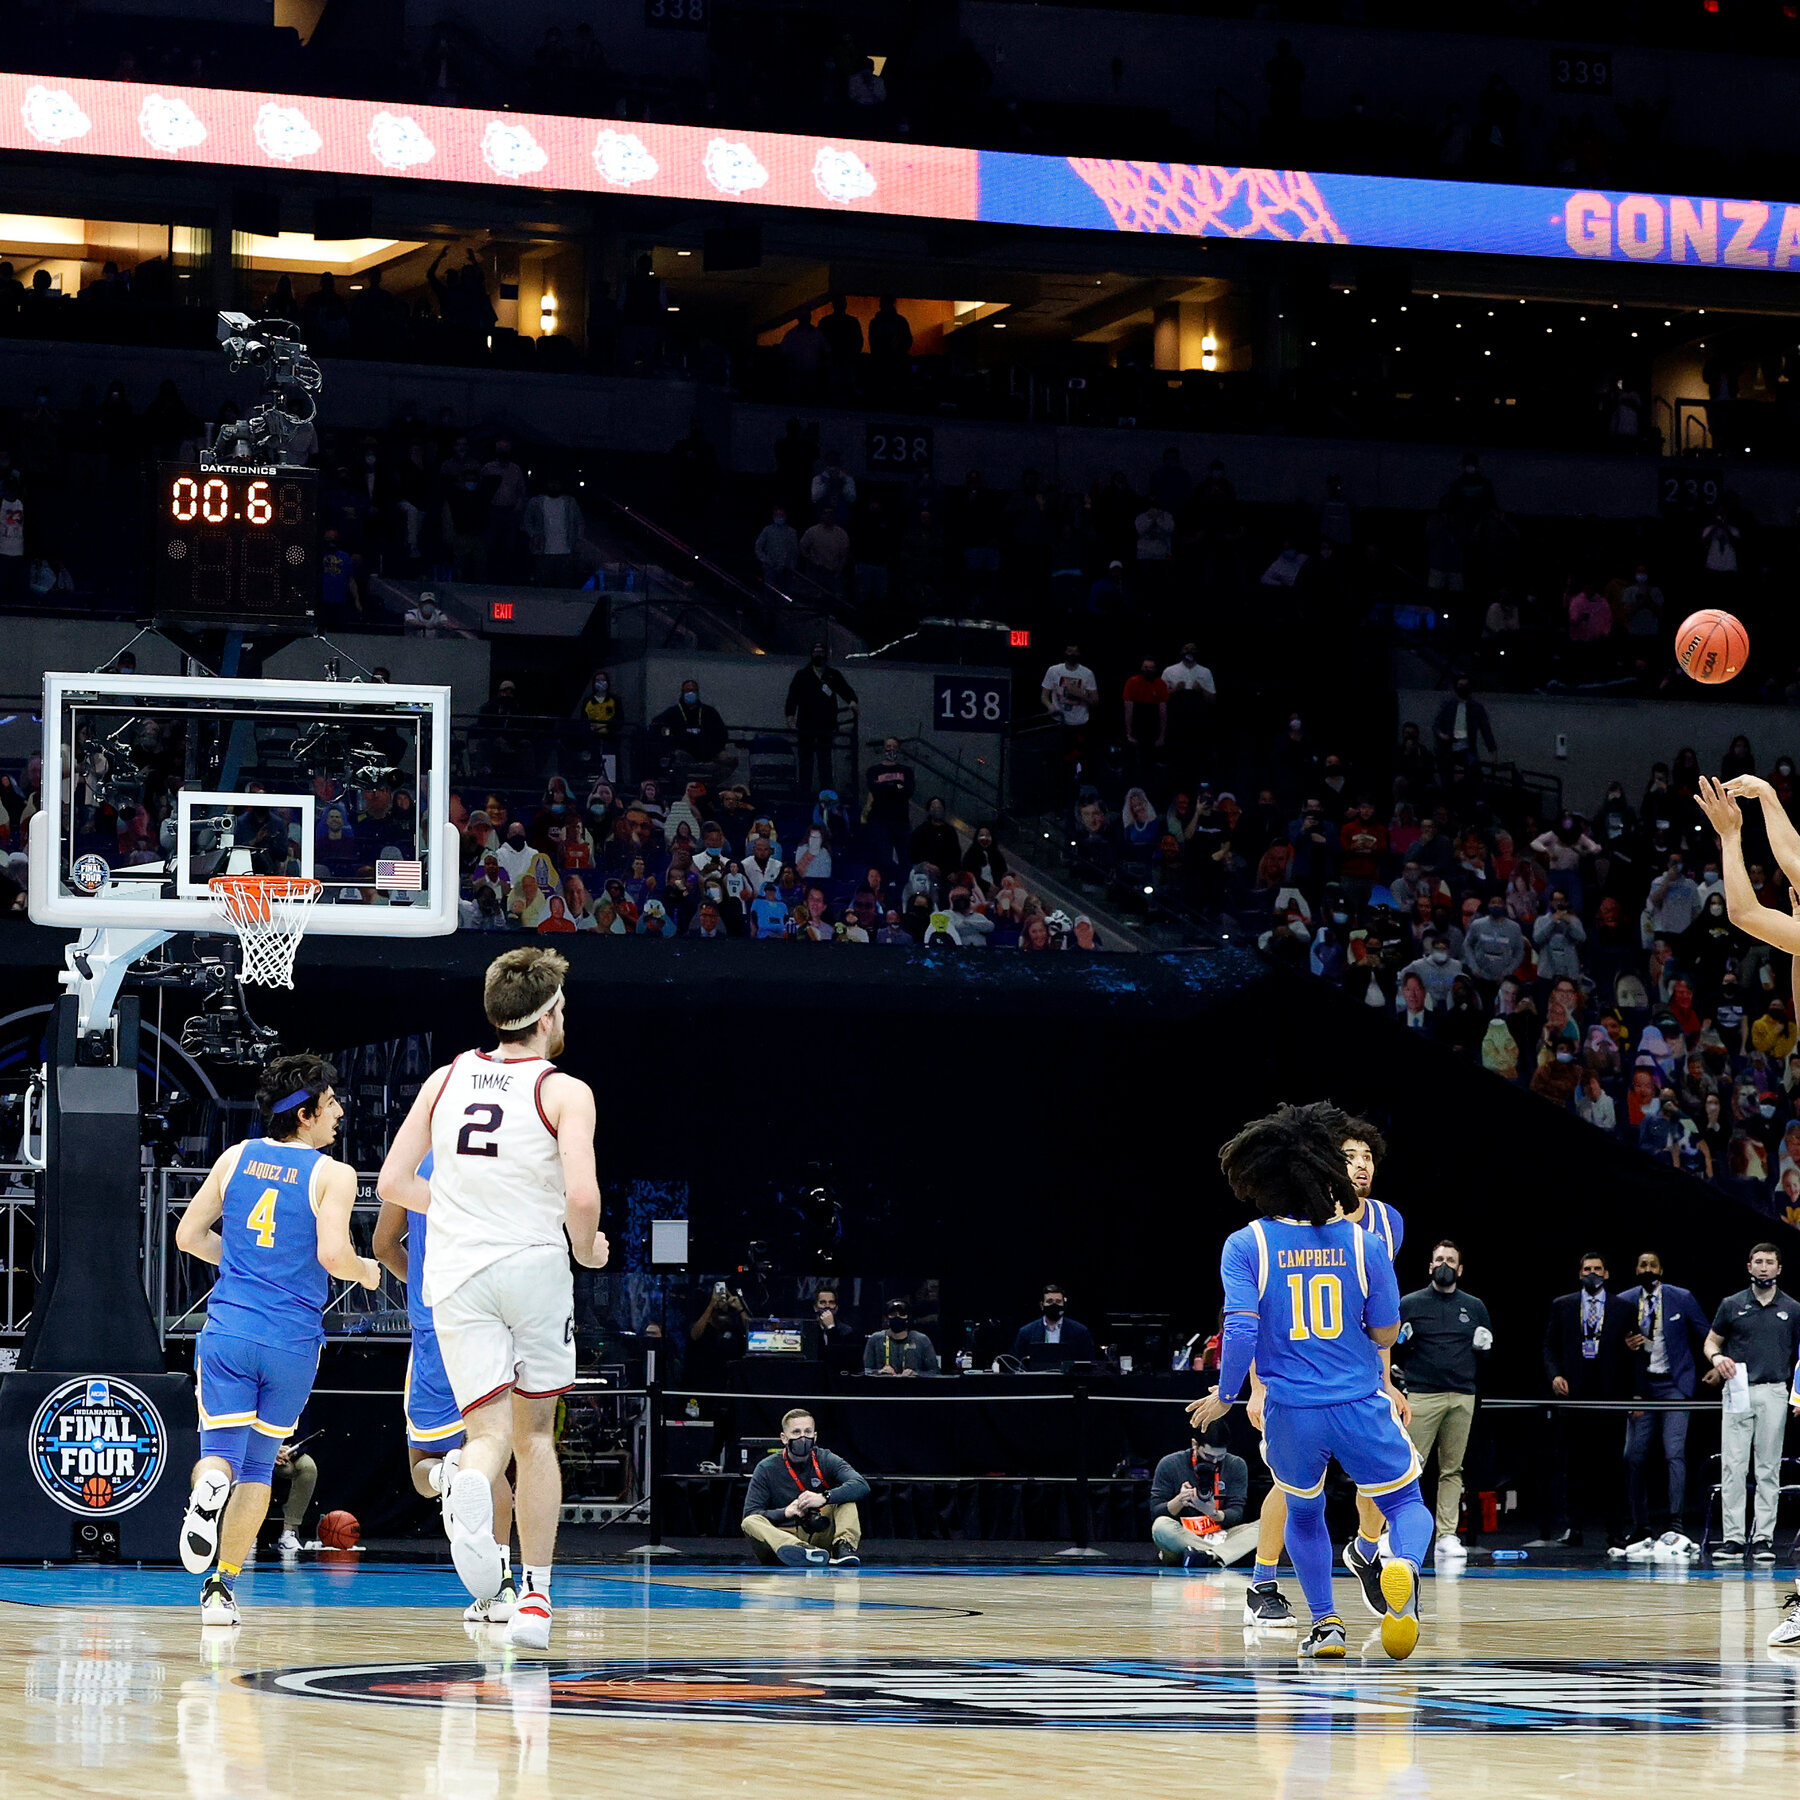 Gonzaga's Buzzer Beater A Reminder Of The Hoopla That's Missing